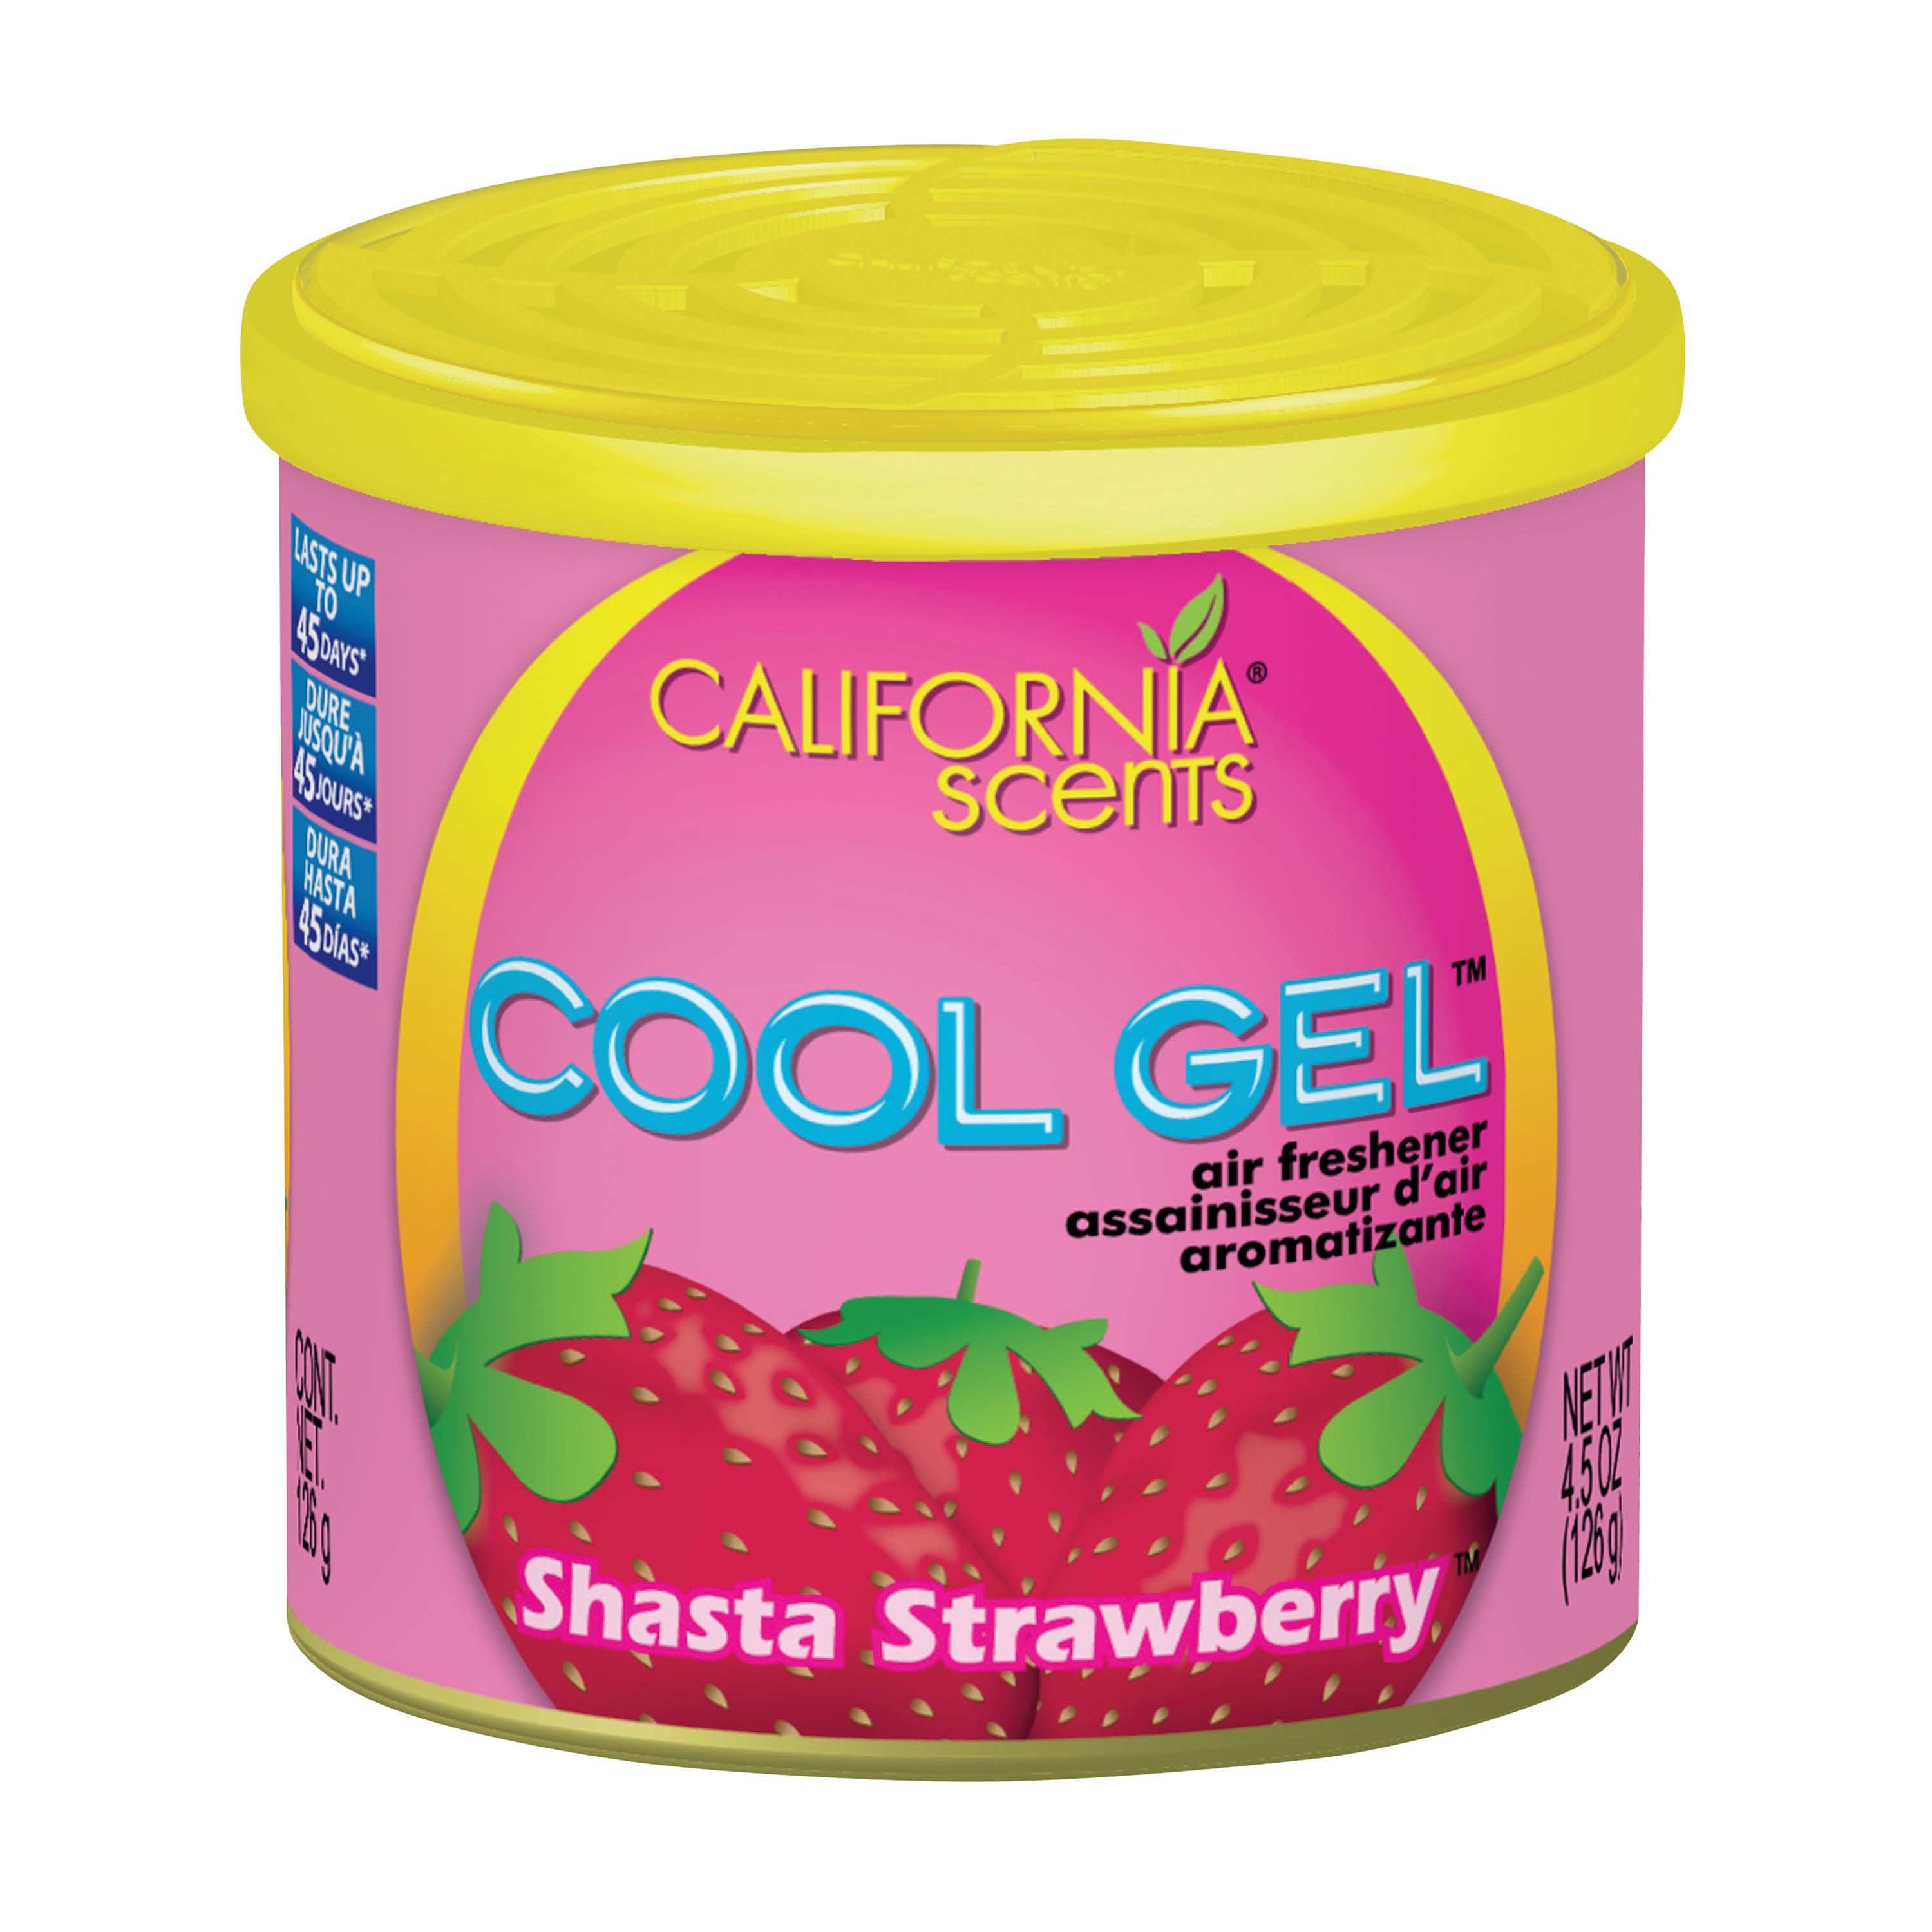 California Scents Car Scents Shasta Strawberry Cool Gel Air